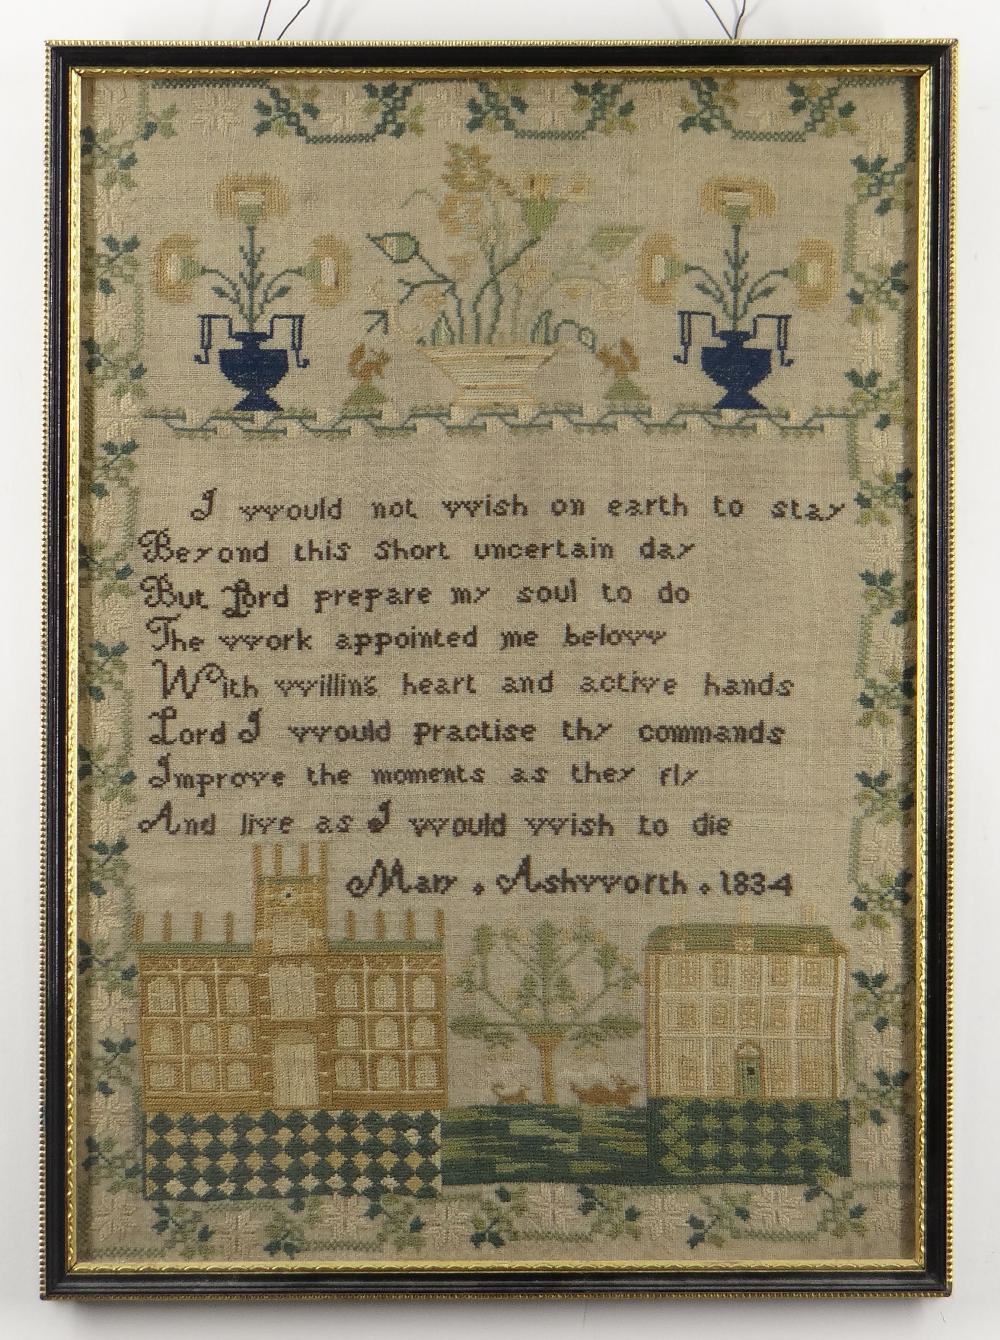 WILLIAM IV NEEDLEWORK SAMPLER, by Mary Ashworth 1834, decorated with flowering urns and squirrels